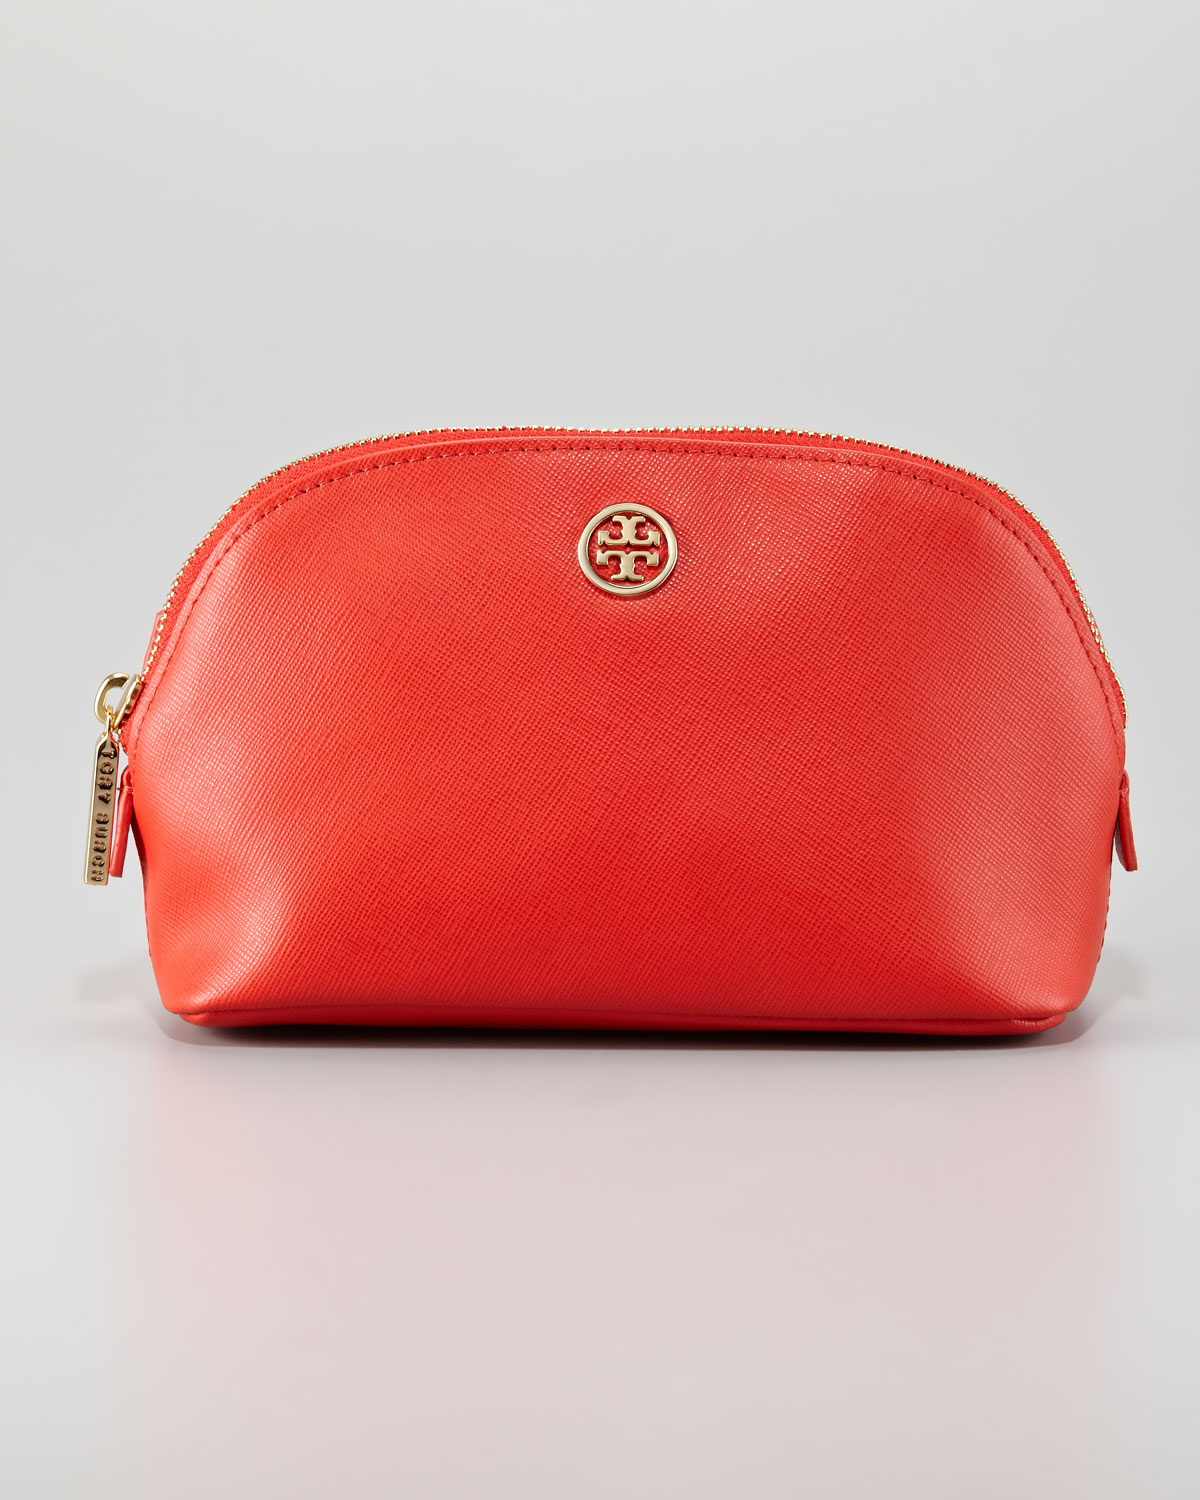 Tory Burch Robinson Makeup Bag Hot Red in Red (hot red beige) | Lyst